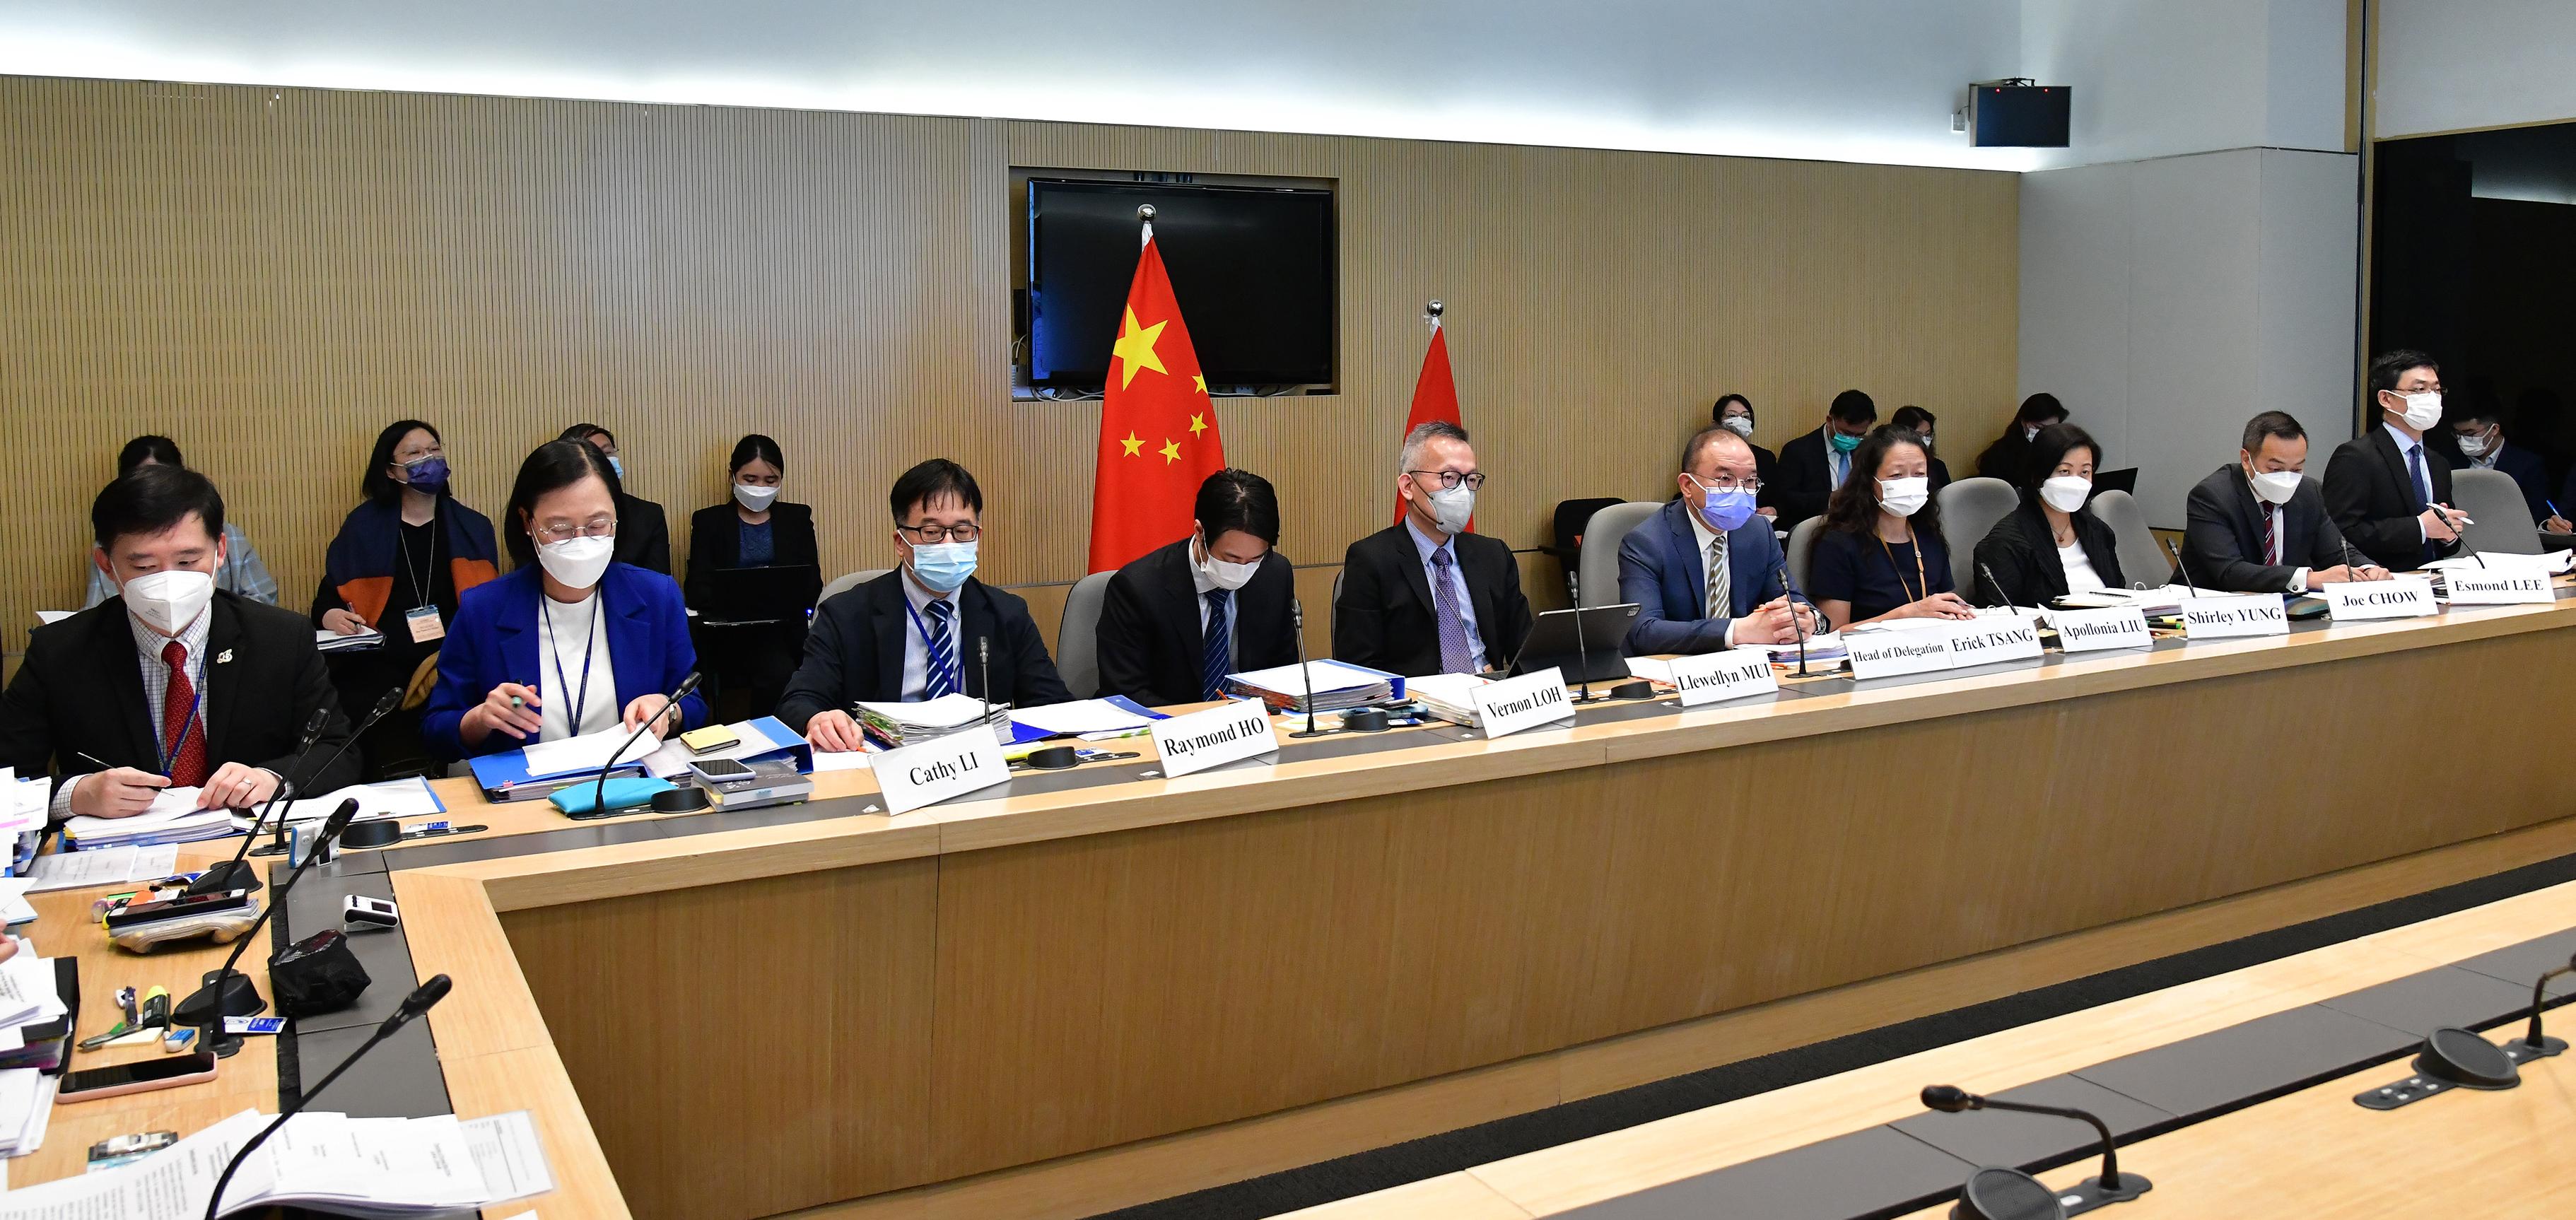 The Secretary for Constitutional and Mainland Affairs, Mr Erick Tsang Kwok-wai (front row, fifth right), led the delegation of the Hong Kong Special Administrative Region Government to attend the meeting of the United Nations Human Rights Committee by videoconferencing today (July 7). Photo shows (front row, from left) the Under Secretary for Constitutional and Mainland Affairs, Mr Clement Woo; the Principal Assistant Secretary (Constitutional and Mainland Affairs), Miss Cathy Li; the Deputy Commissioner for Labour (Labour Administration), Mr Raymond Ho; the Senior Assistant Solicitor General (Human Rights), Mr Vernon Loh; the Acting Solicitor General, Mr Llewellyn Mui; Mr Tsang; Deputy Secretary for Security Mrs Apollonia Liu; Deputy Secretary for Security Miss Shirley Yung; the Deputy Commissioner of Police (Management), Mr Joe Chow; and Deputy Secretary for Education Mr Esmond Lee attending the meeting.